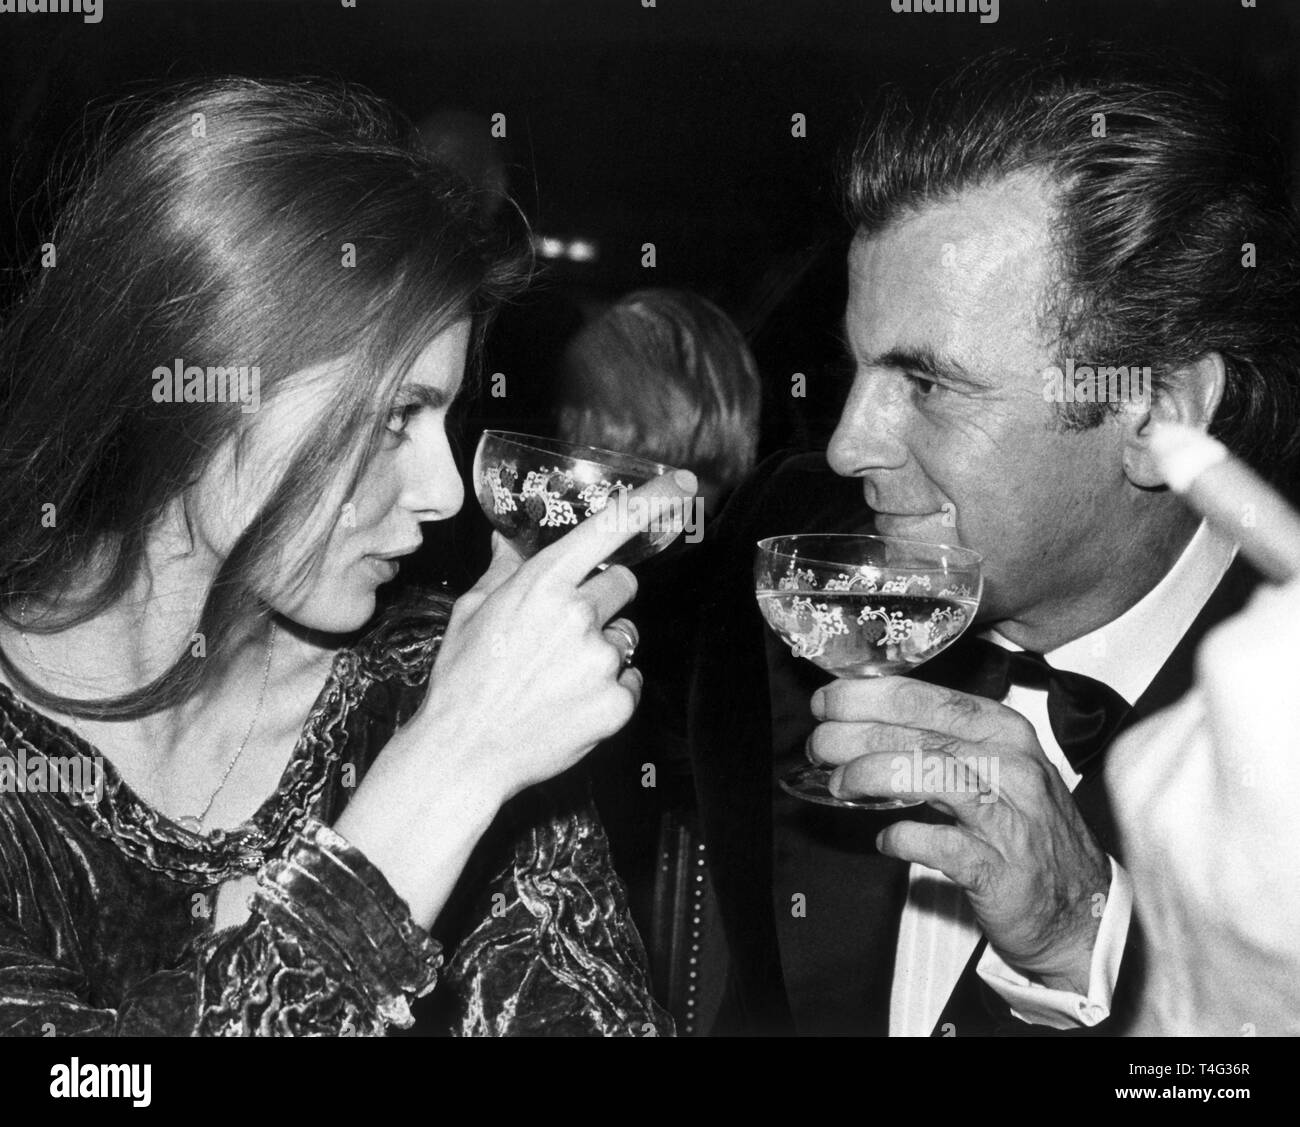 Swiss-Austrian actor Maximilian Schell and German actress Nastassja Kinski look in each other's eyes during the German Film Ball on 19 January 1980 in Munich. | usage worldwide Stock Photo